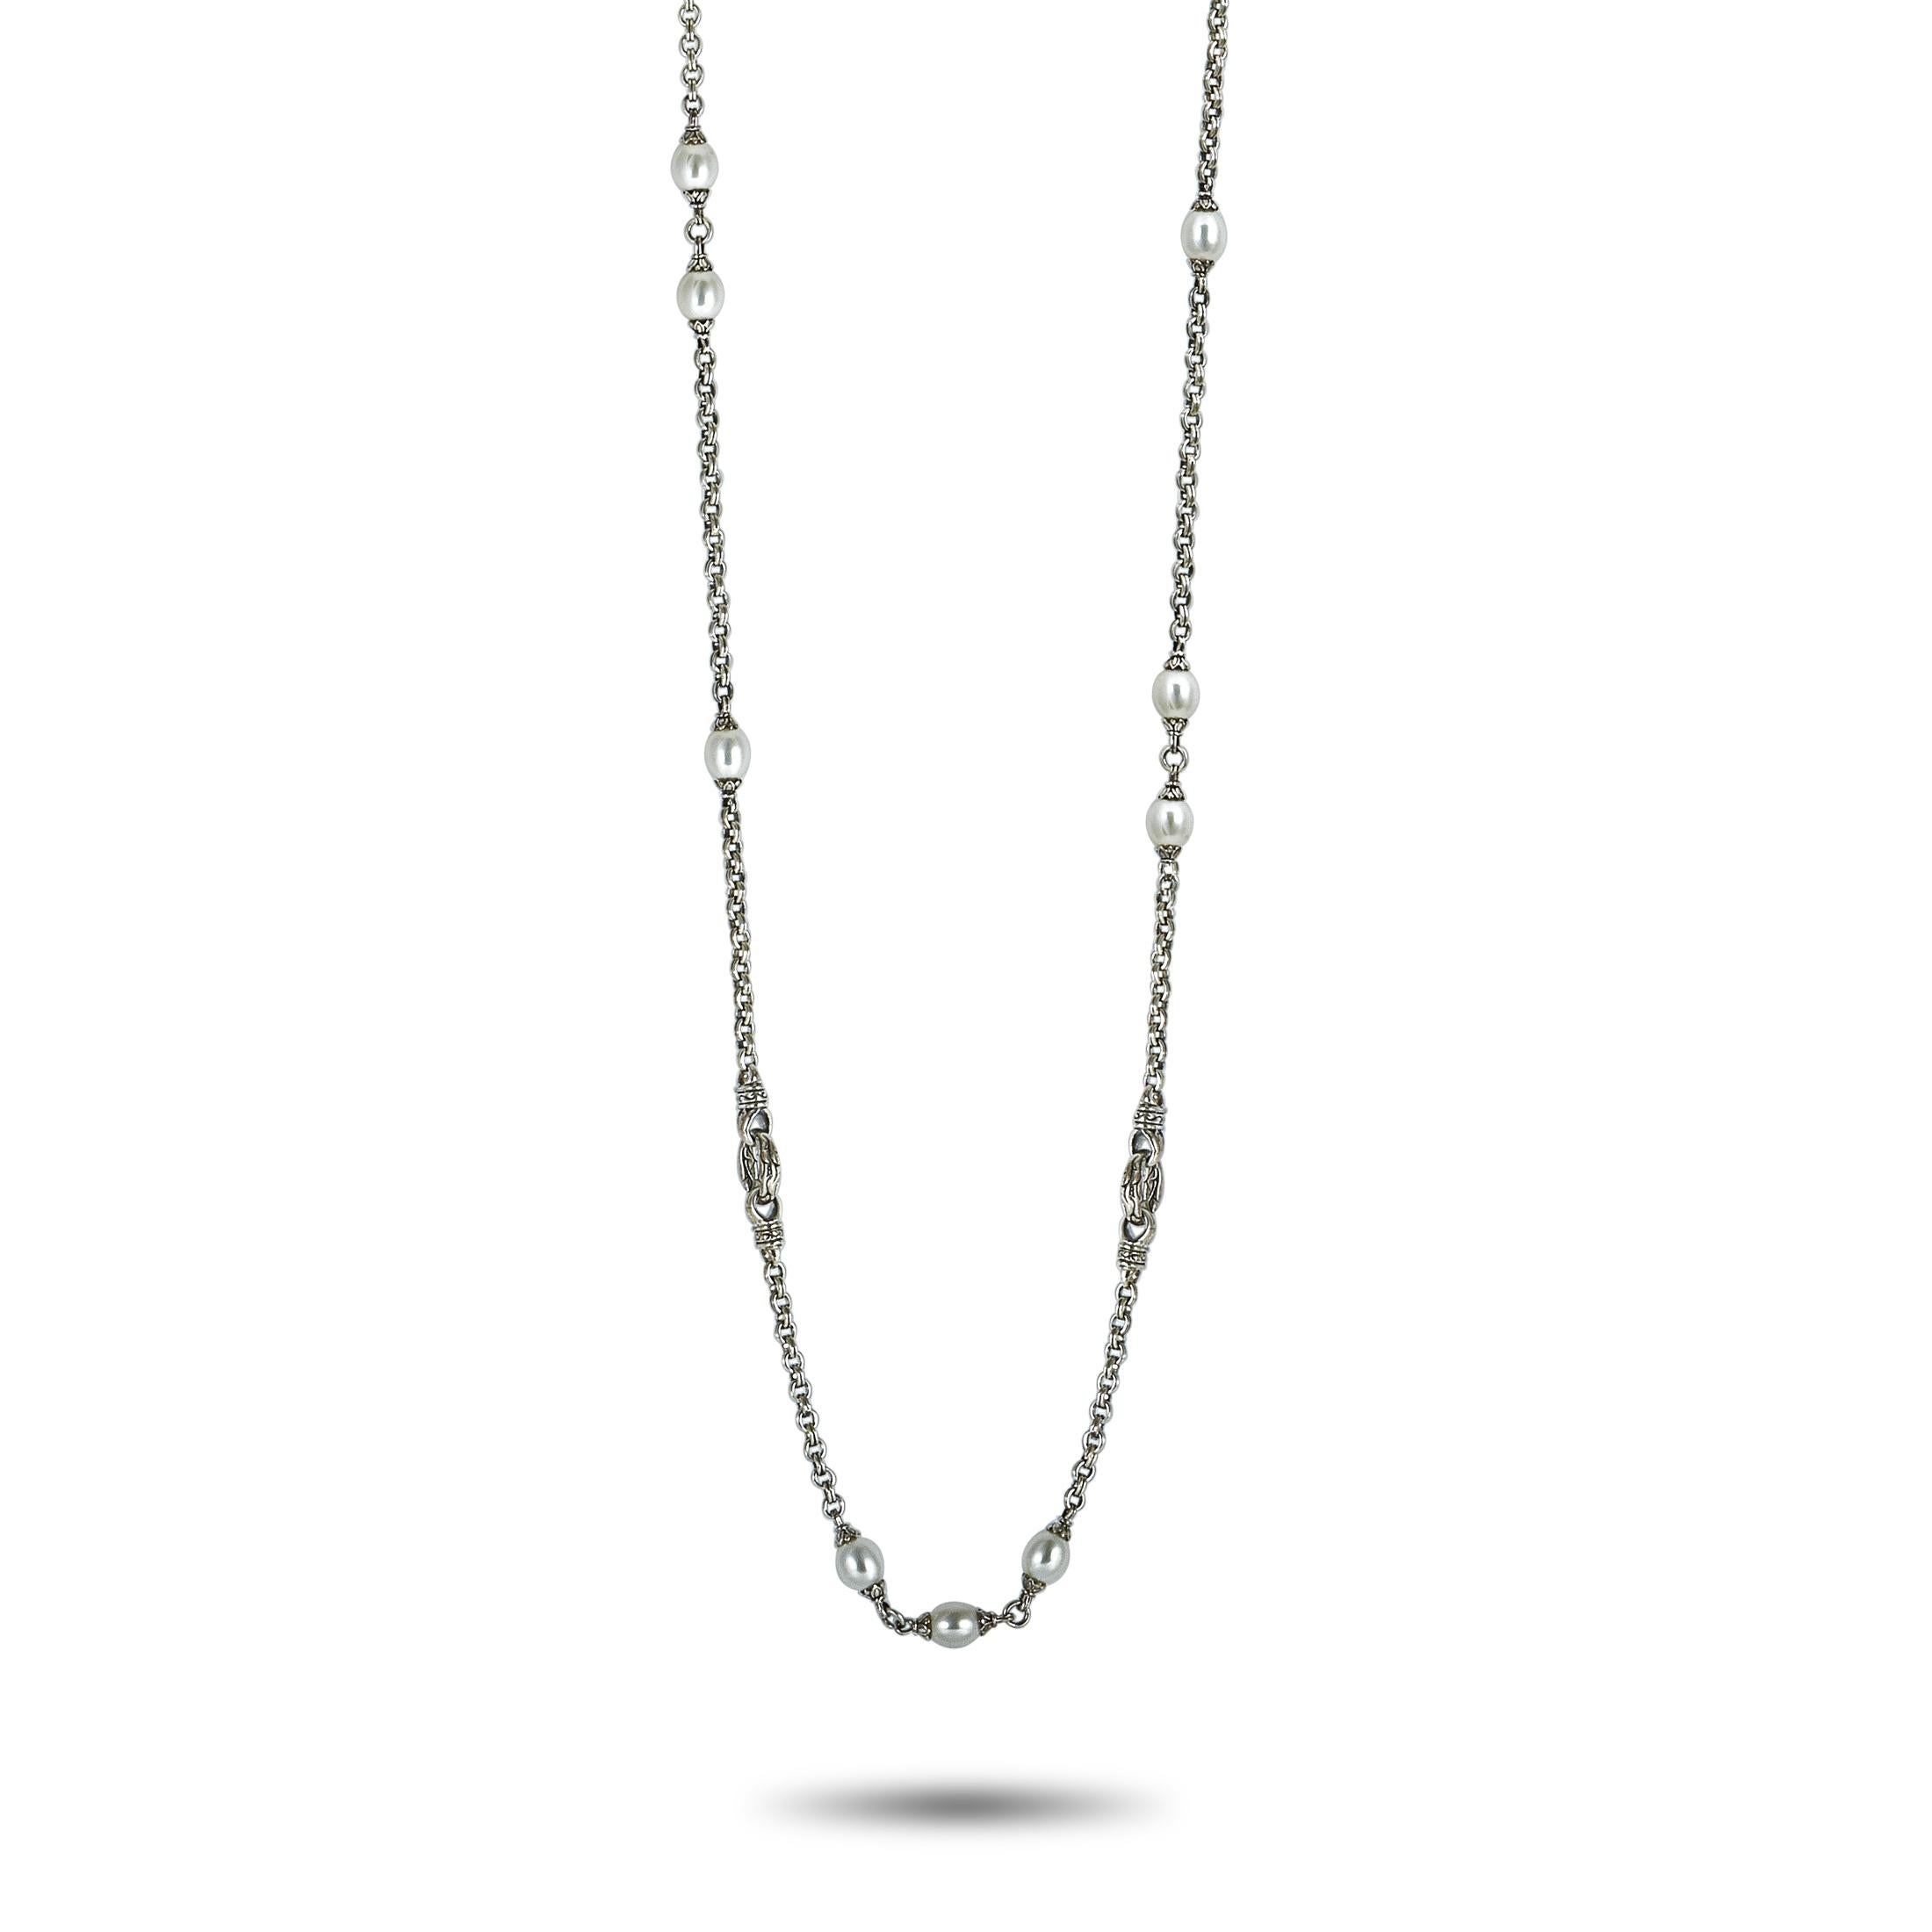 This Scott Kay necklace is crafted from sterling silver and embellished with pearls. The necklace weighs 74.5 grams and measures 48” in length.

Offered in brand new condition, this jewelry piece includes a gift box.